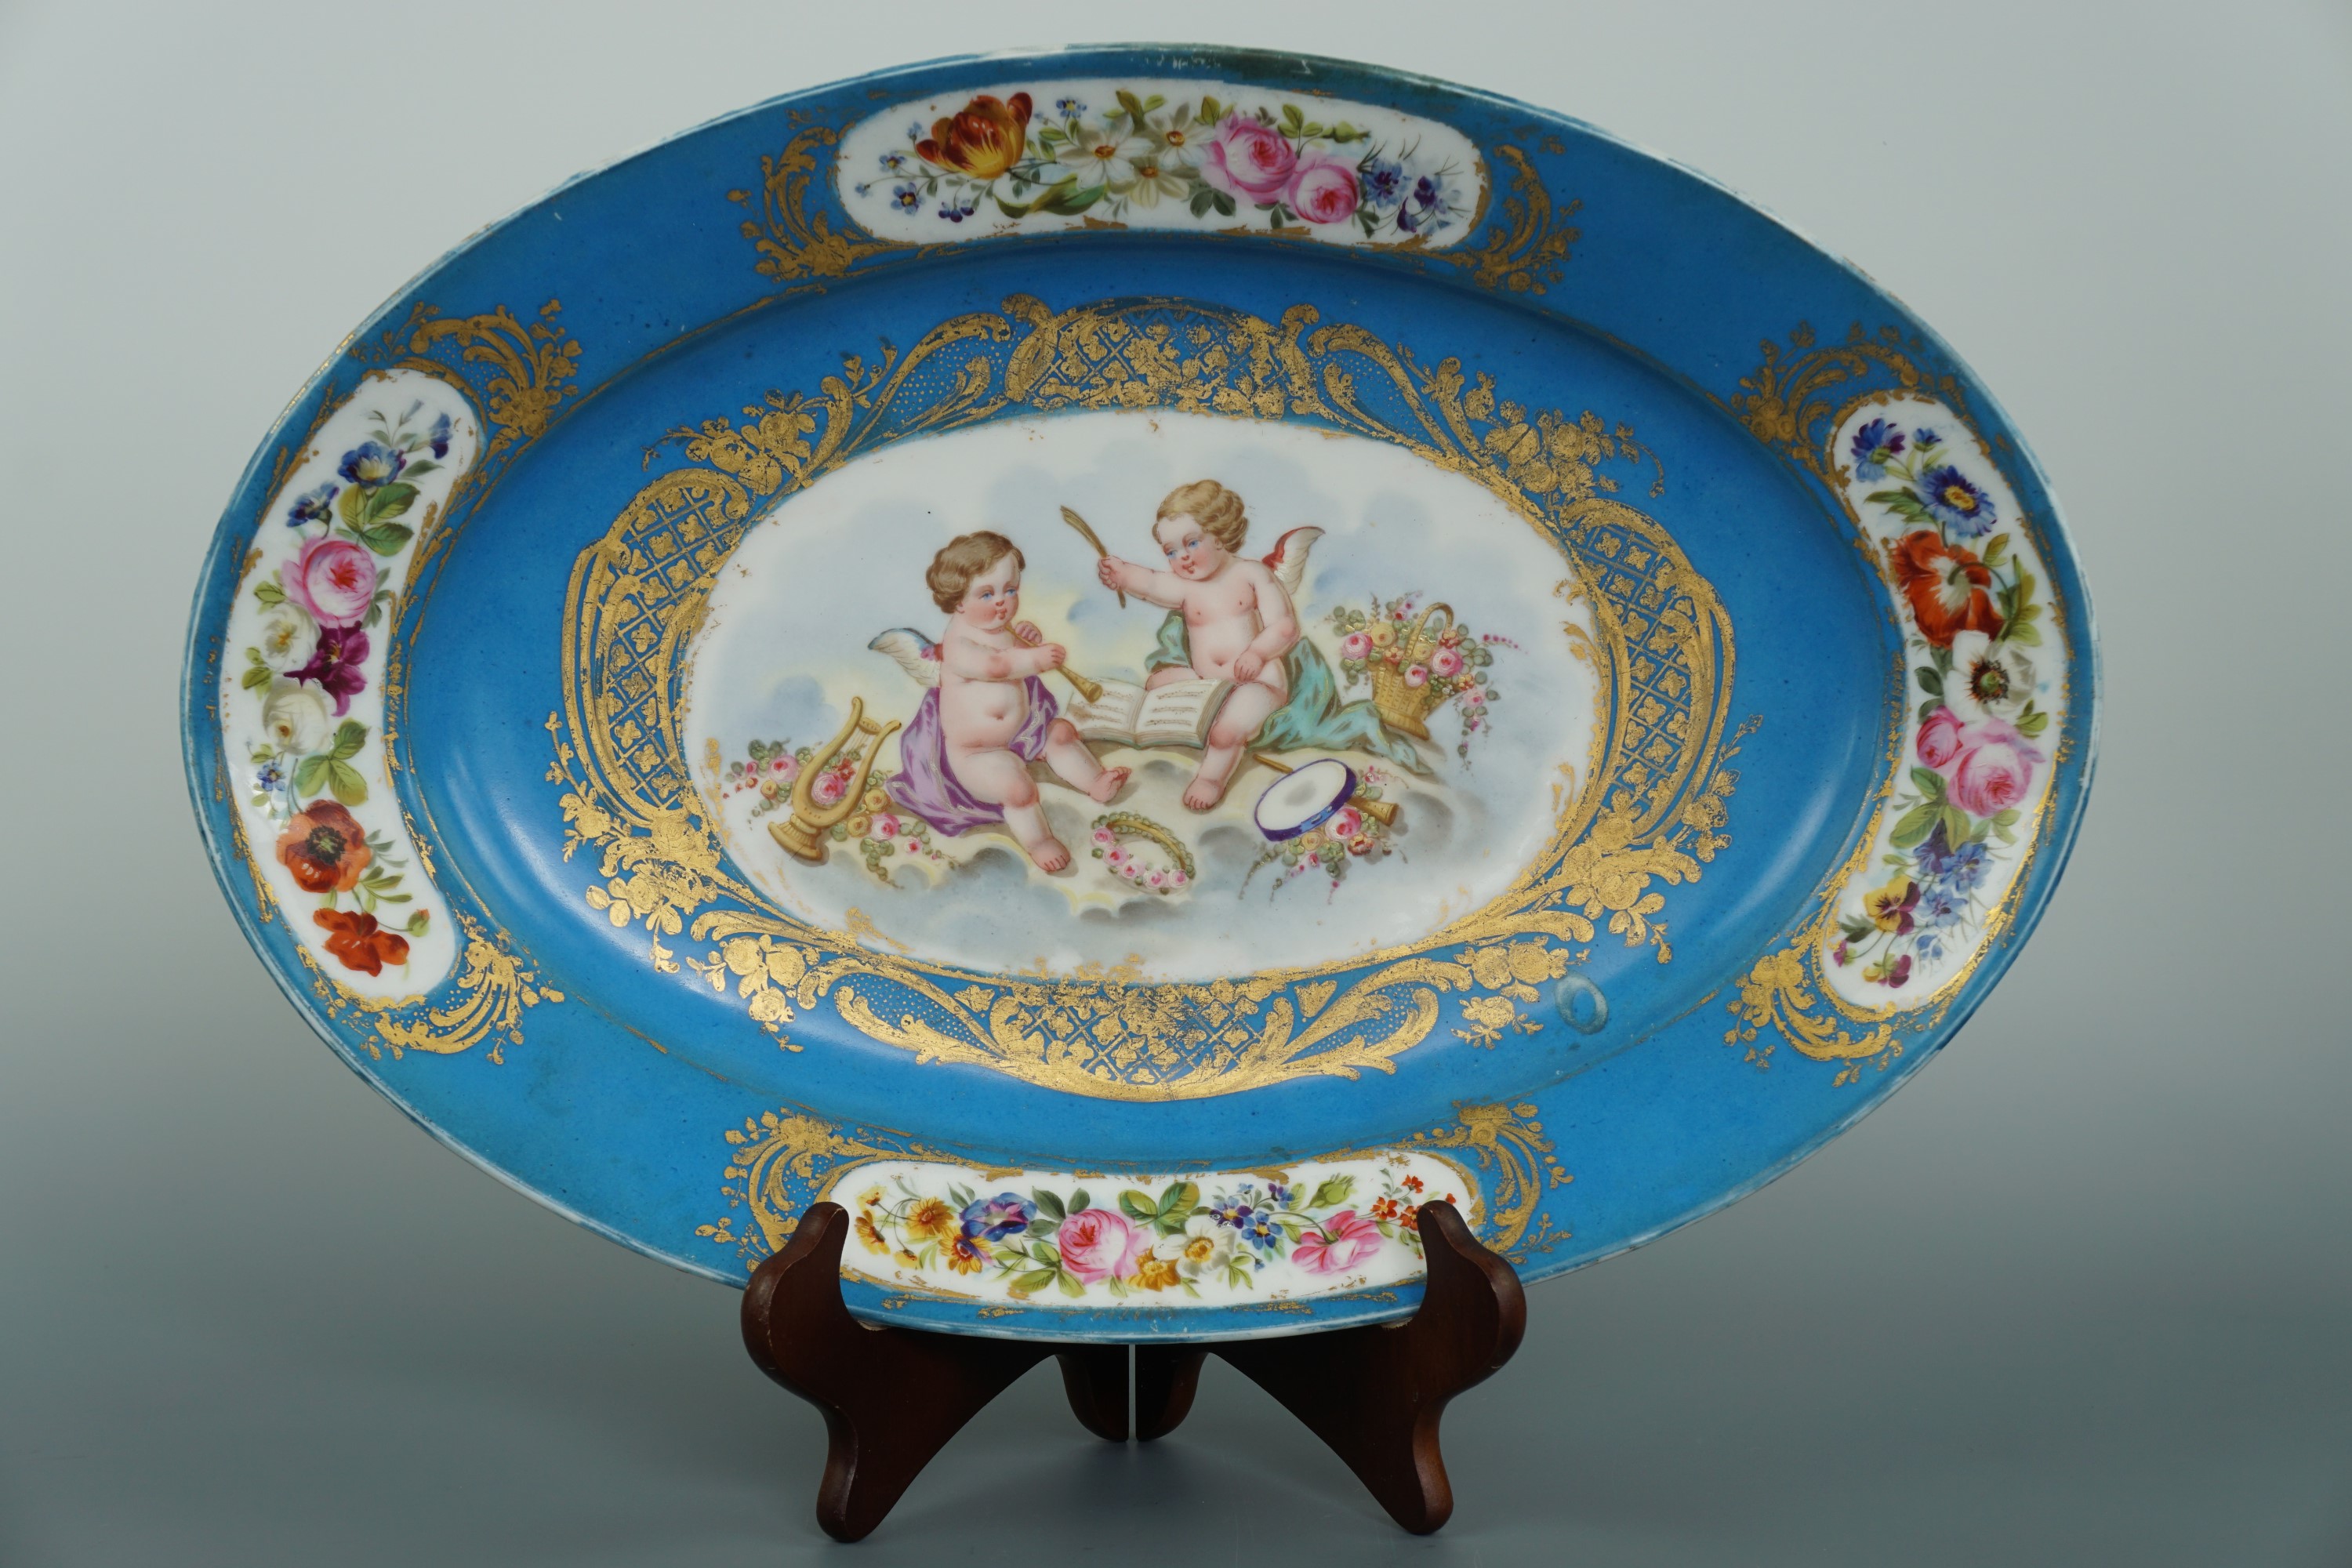 A 19th Century Sevres porcelain oval service dish, decorated in depiction of cupids with musical